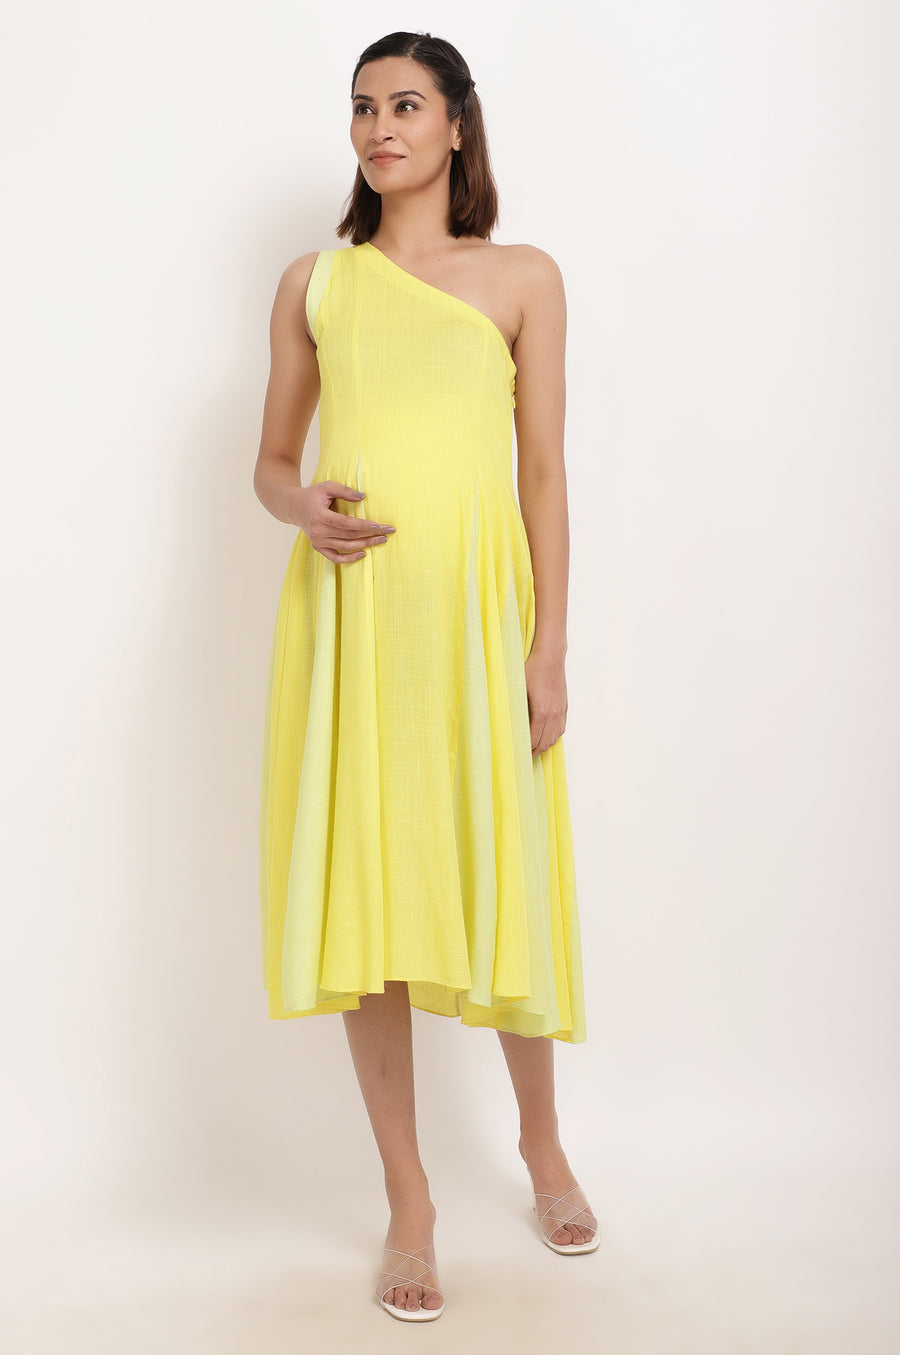 maternity clothes online